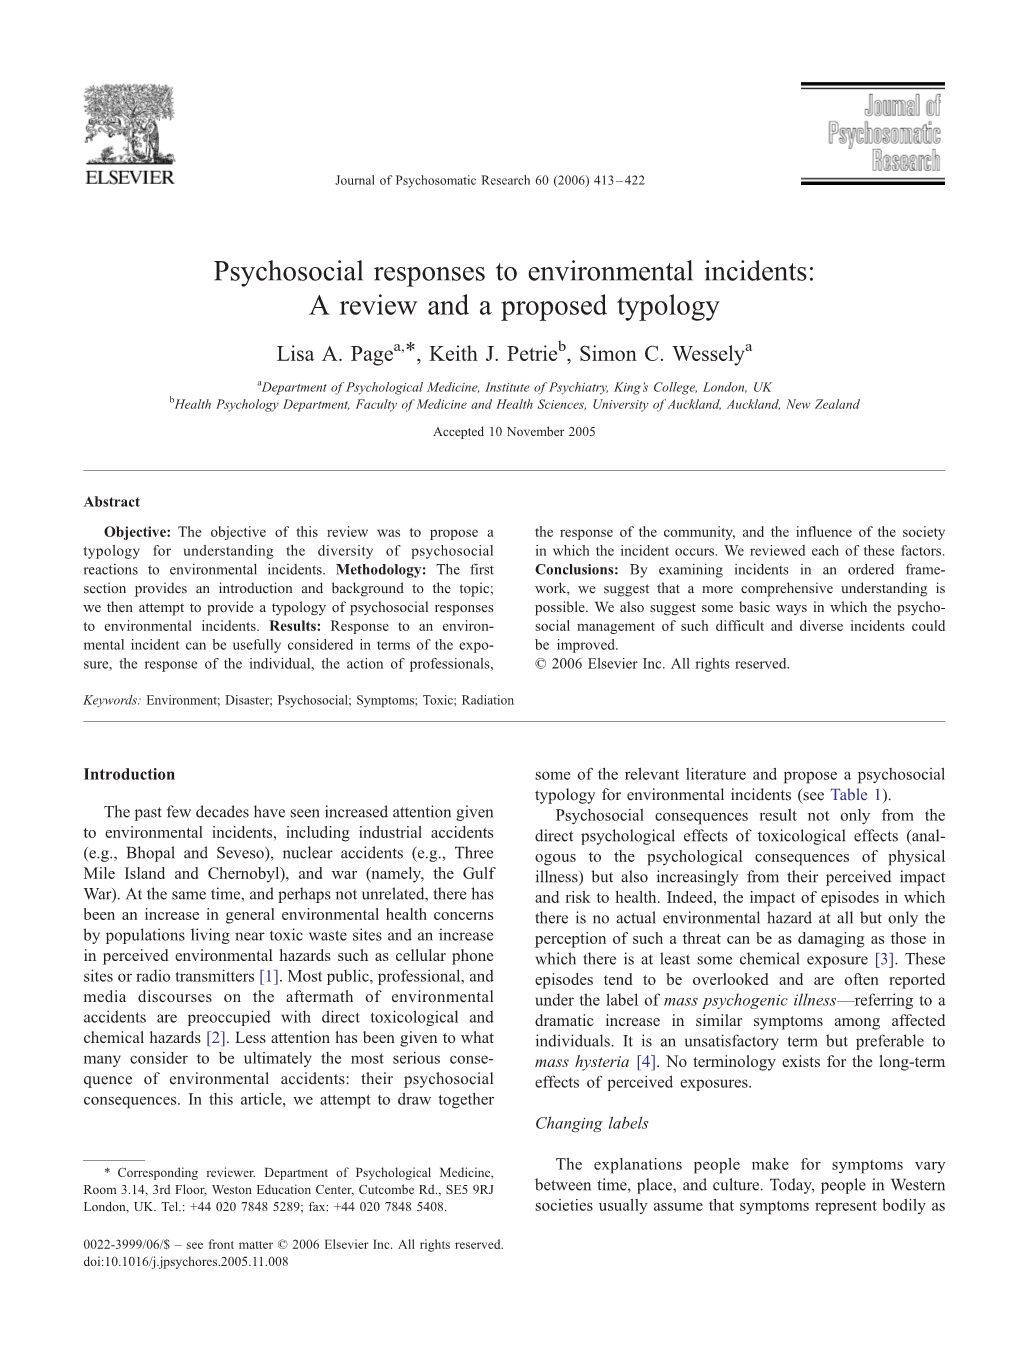 Psychosocial Responses to Environmental Incidents: a Review and a Proposed Typology